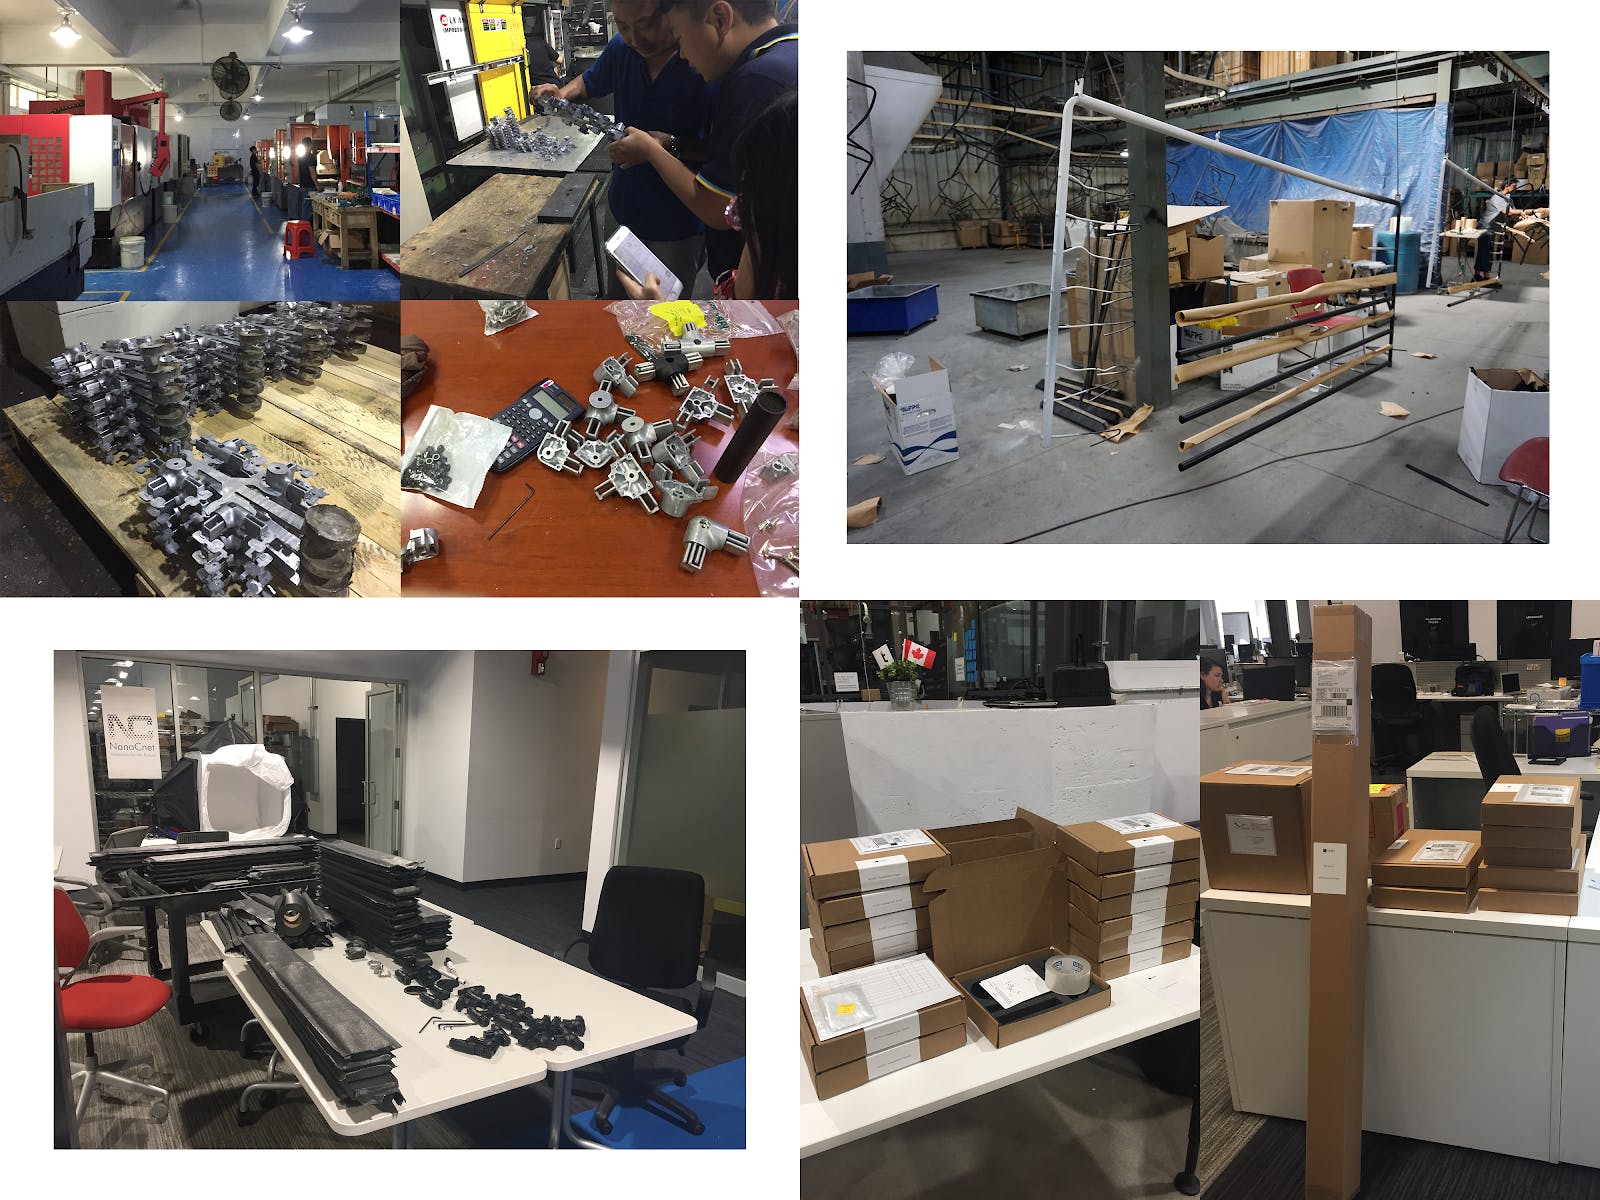 Top left: Visiting die casting vendor in Shenzhen, China, and doing hands-on quality check. Top right: Visiting extrusion vendor in Toronto, Canada, for quality inspection. Bottom left: Packing and sorting parts for shipment. Bottom right: Products finally began to ship!